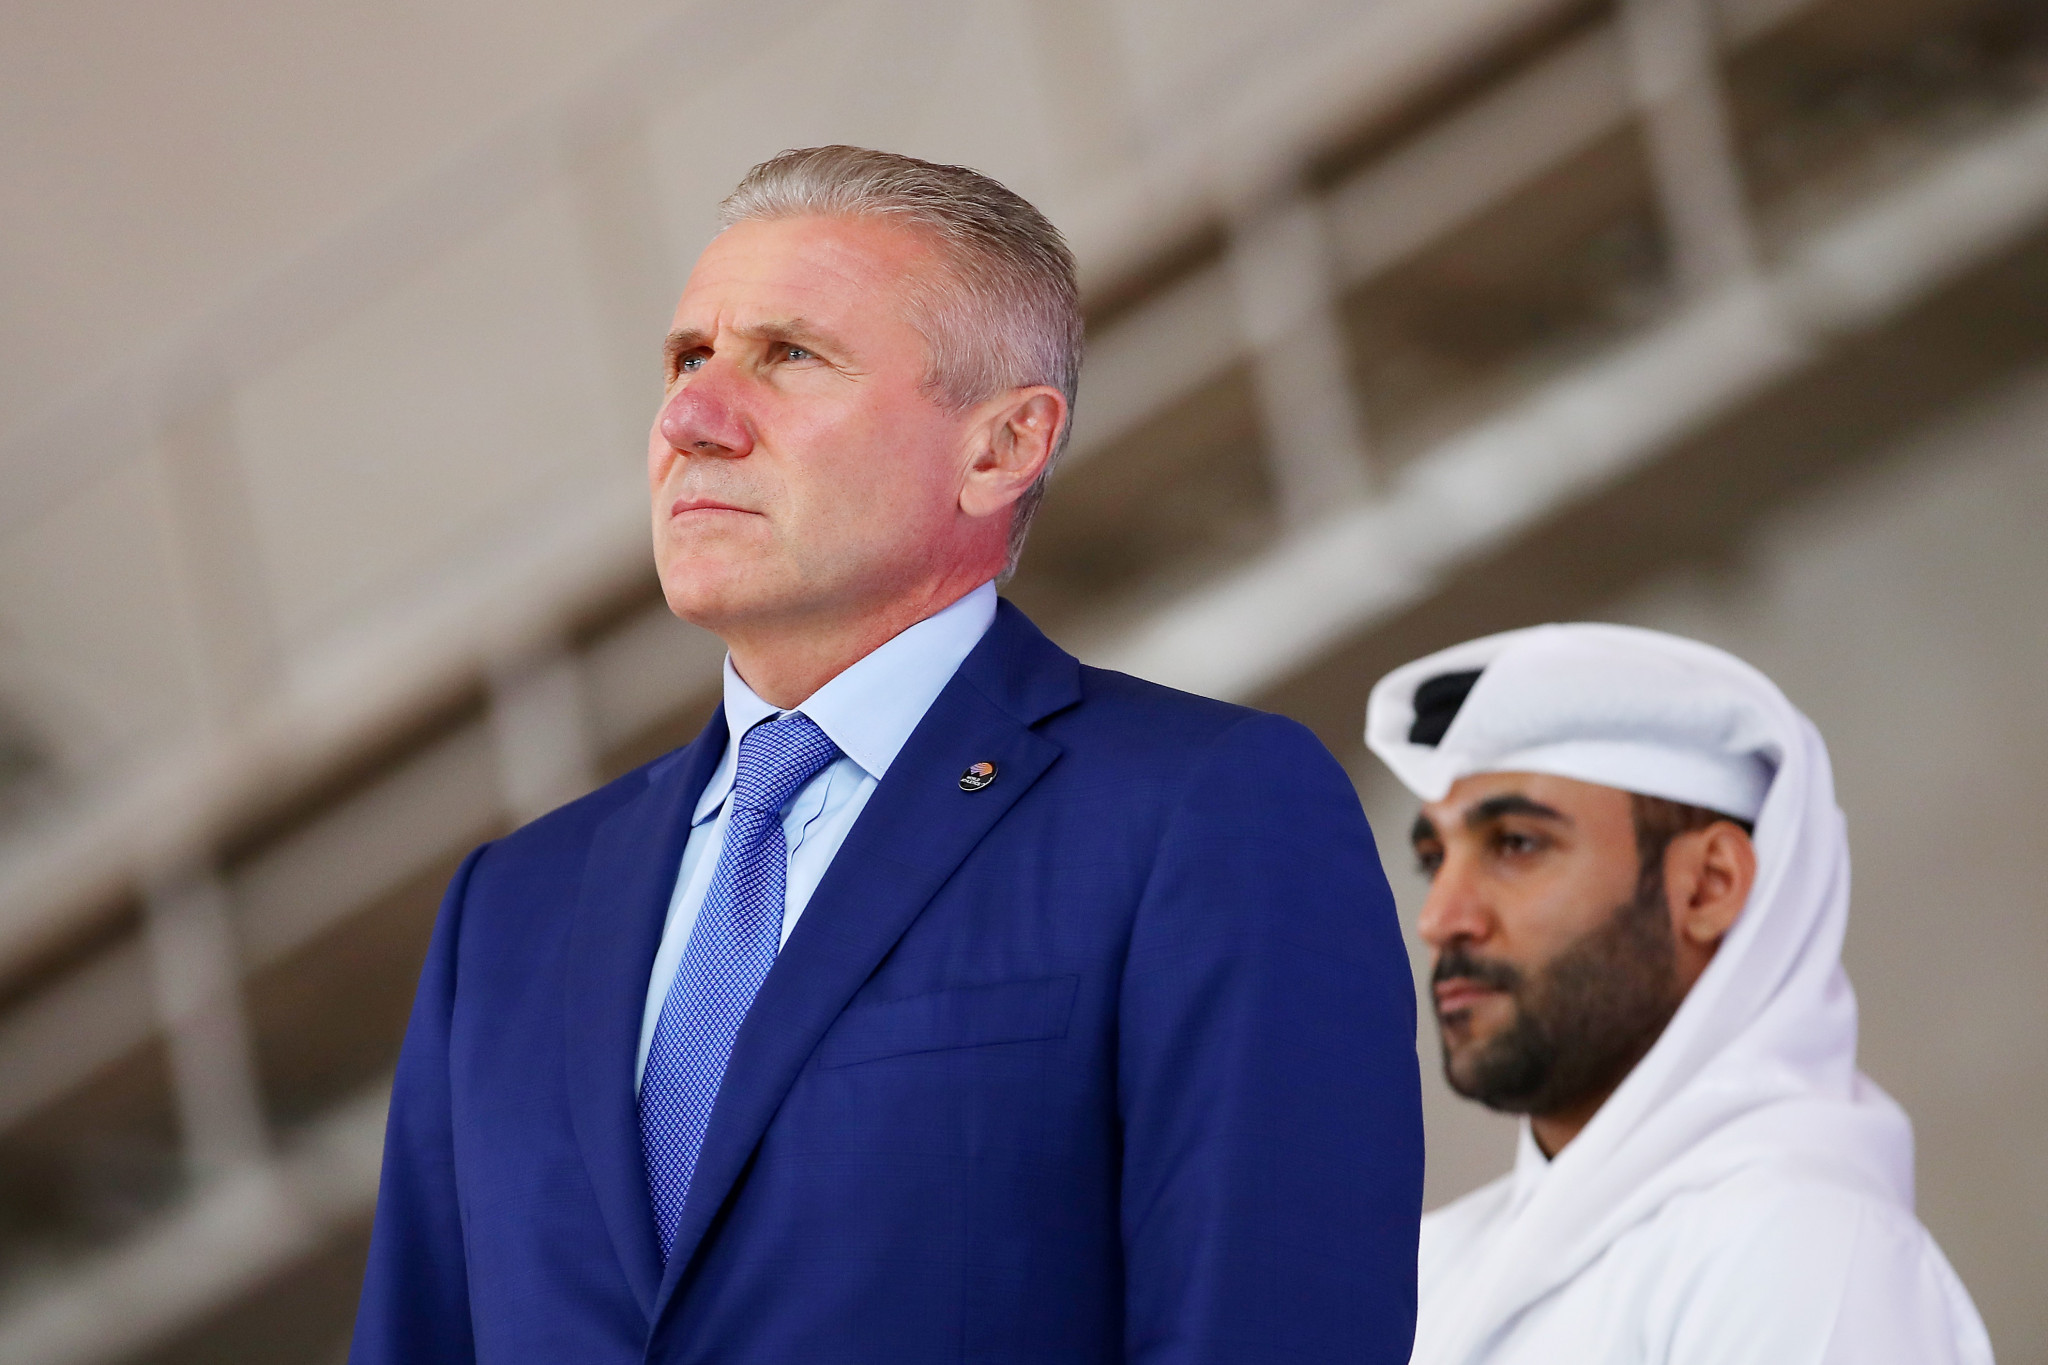 Ukrainian NOC President Sergey Bubka is urging the EOC to ensure athletes from Russia and Belarus remain barred from competition ©KOKSH